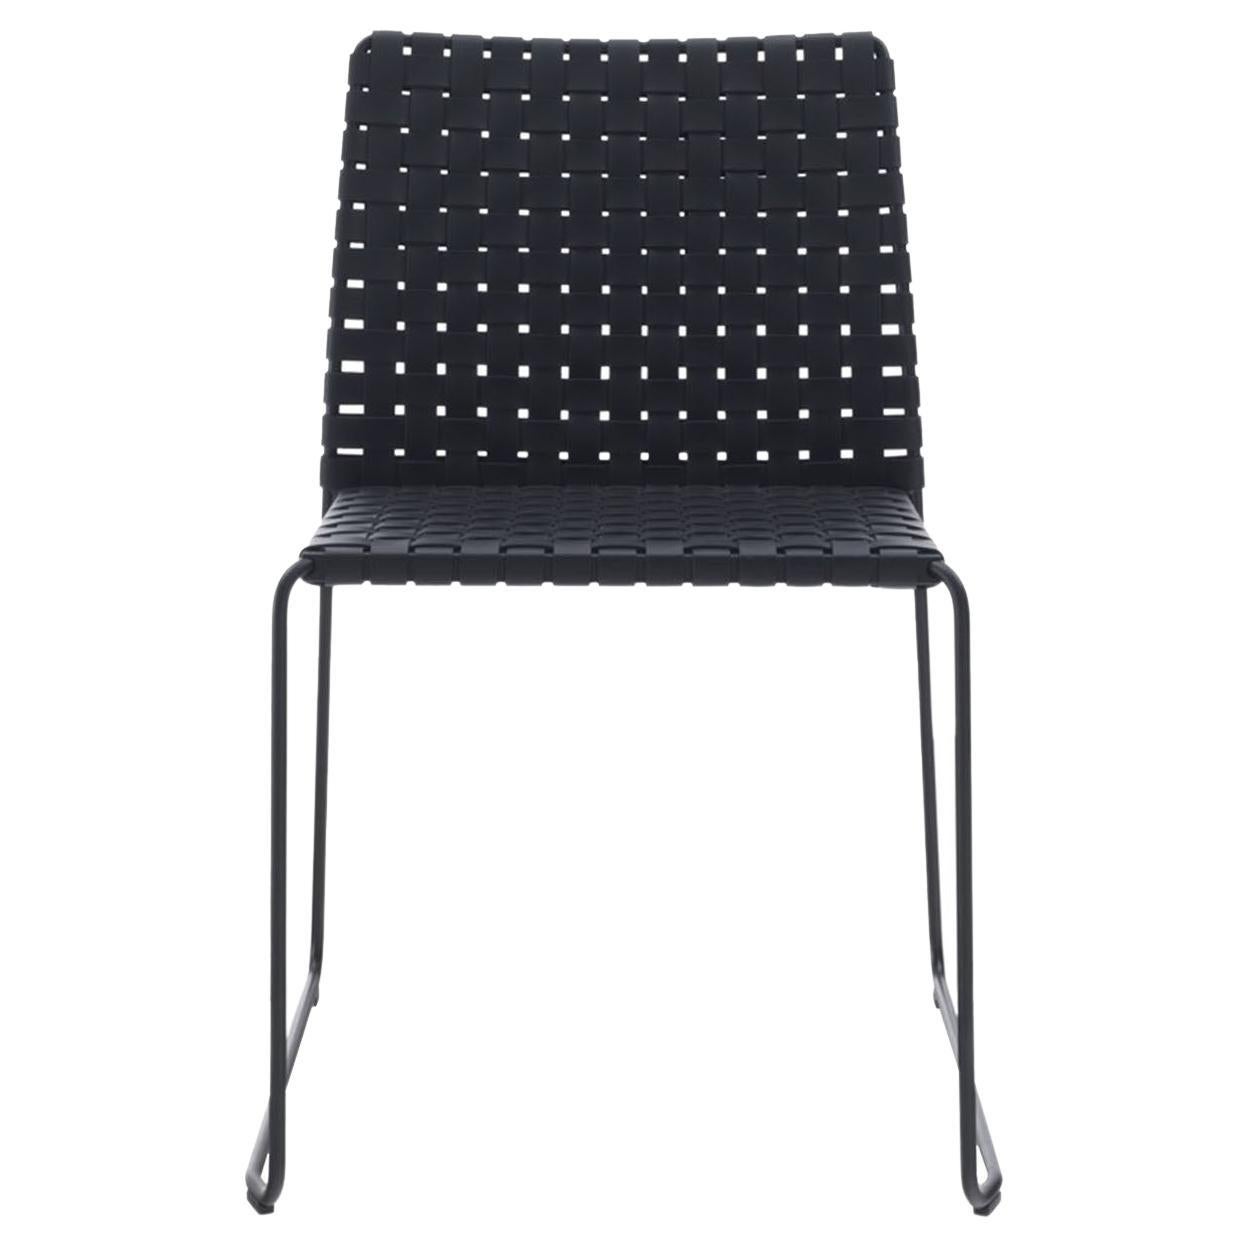 Bizzy Black Woven Chair For Sale